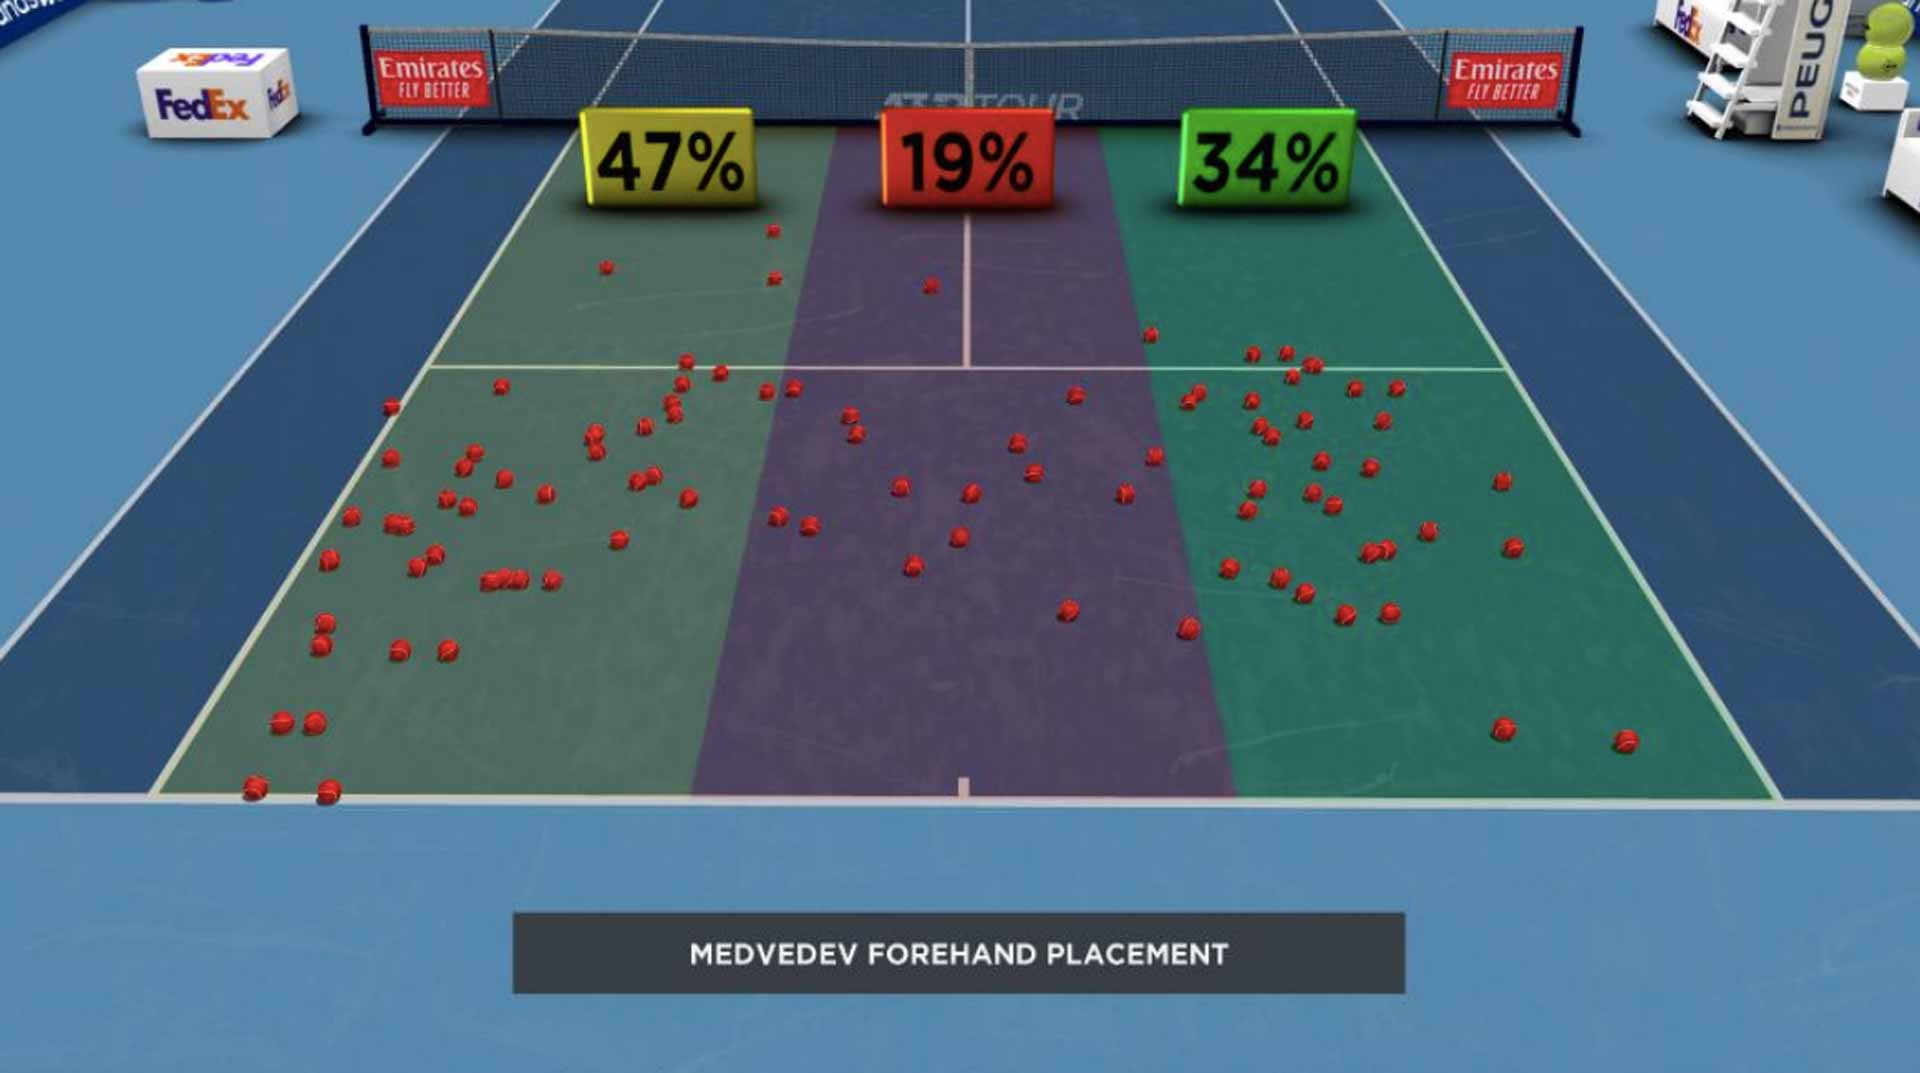 Medvedev Forehand Placement